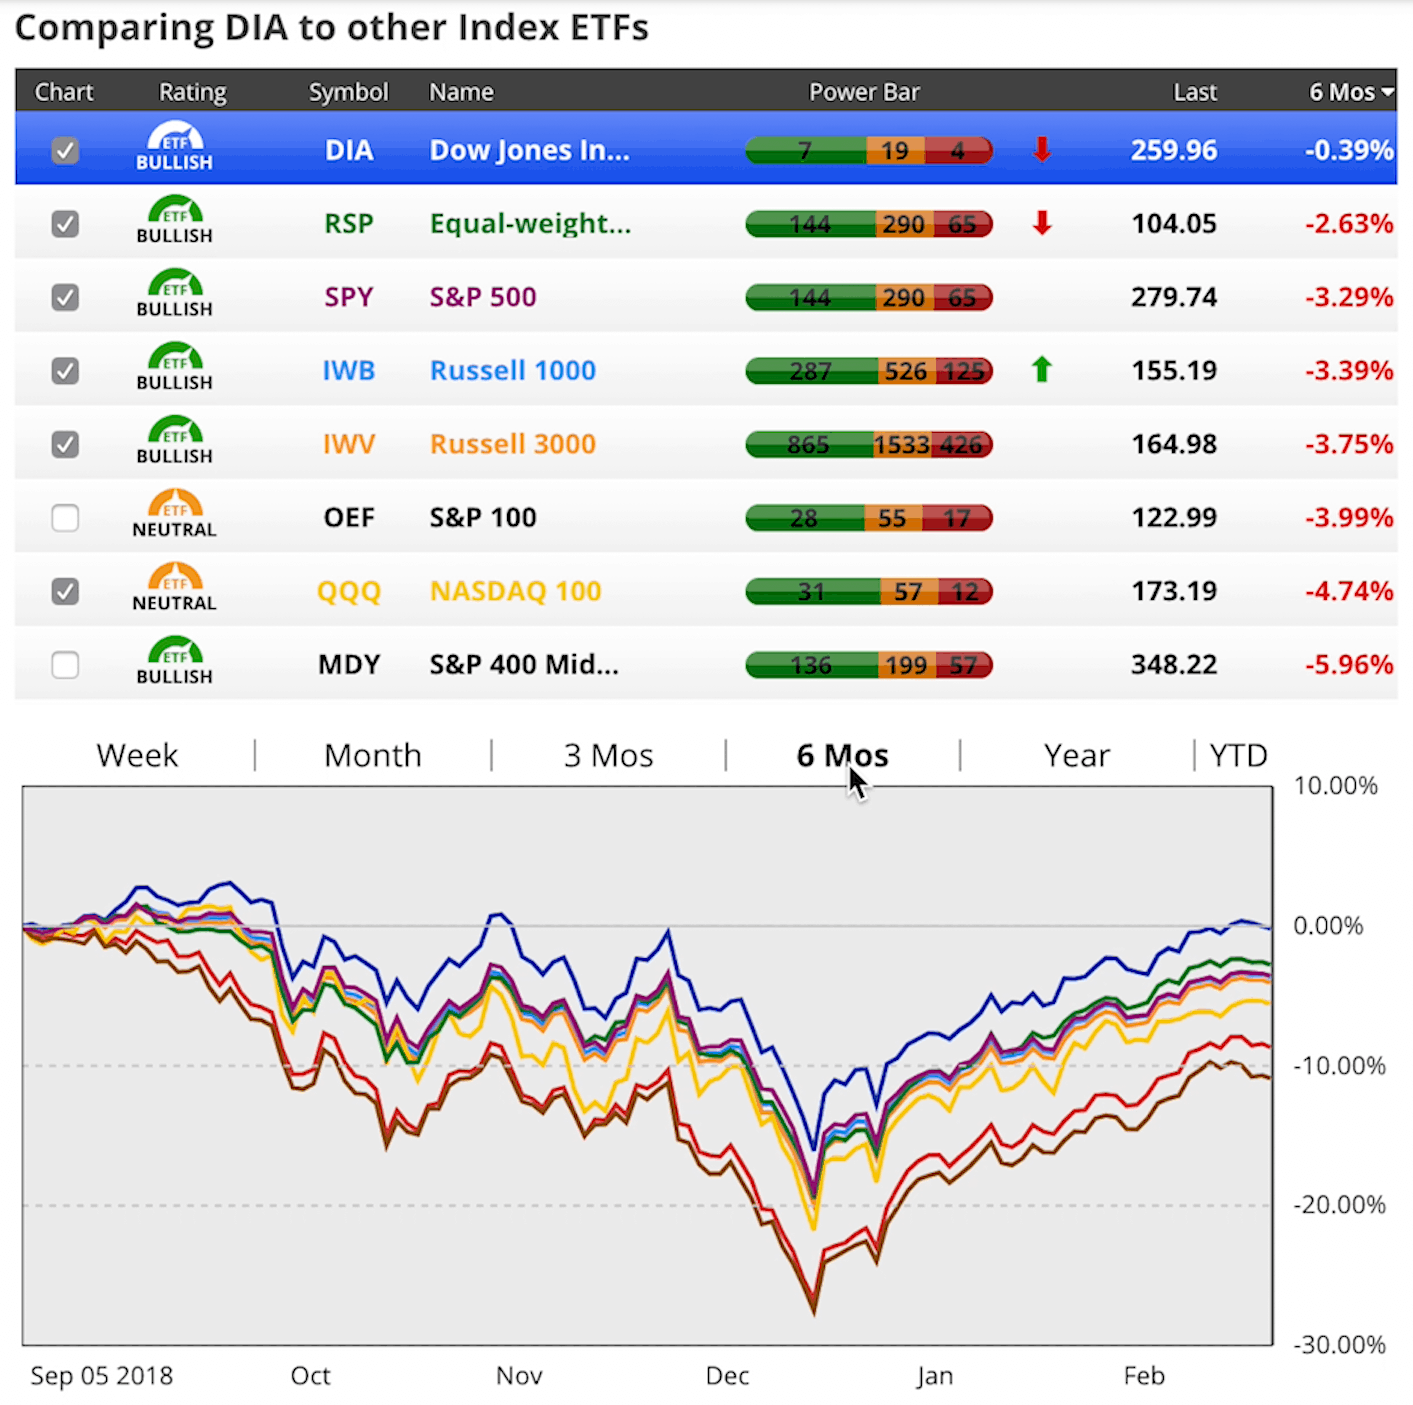 gdp growth and interest rates - index performance last 6 months